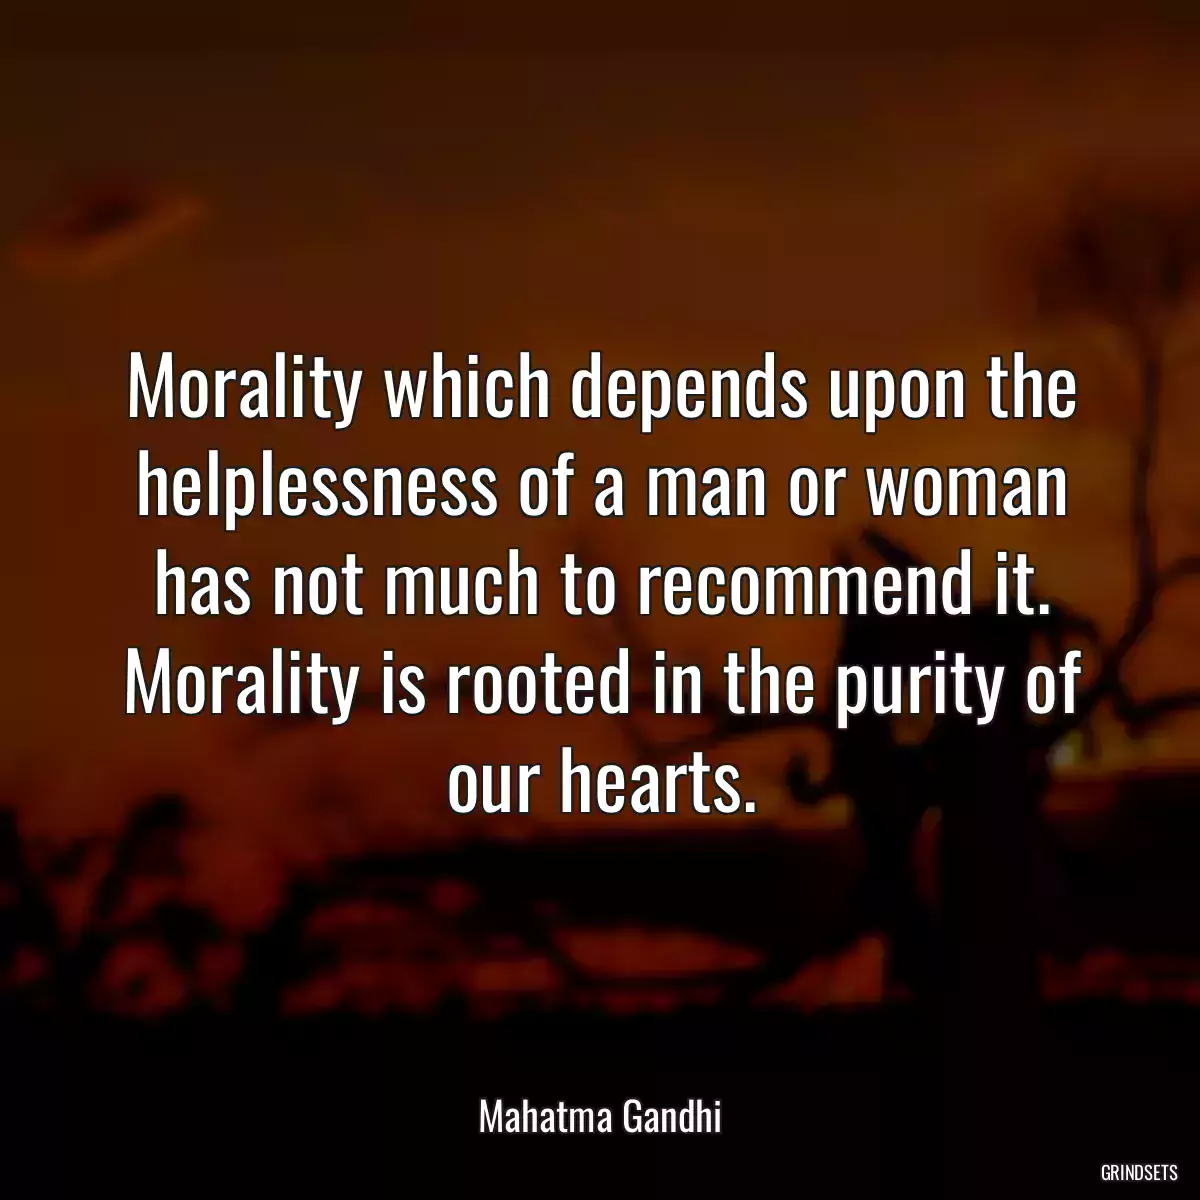 Morality which depends upon the helplessness of a man or woman has not much to recommend it. Morality is rooted in the purity of our hearts.